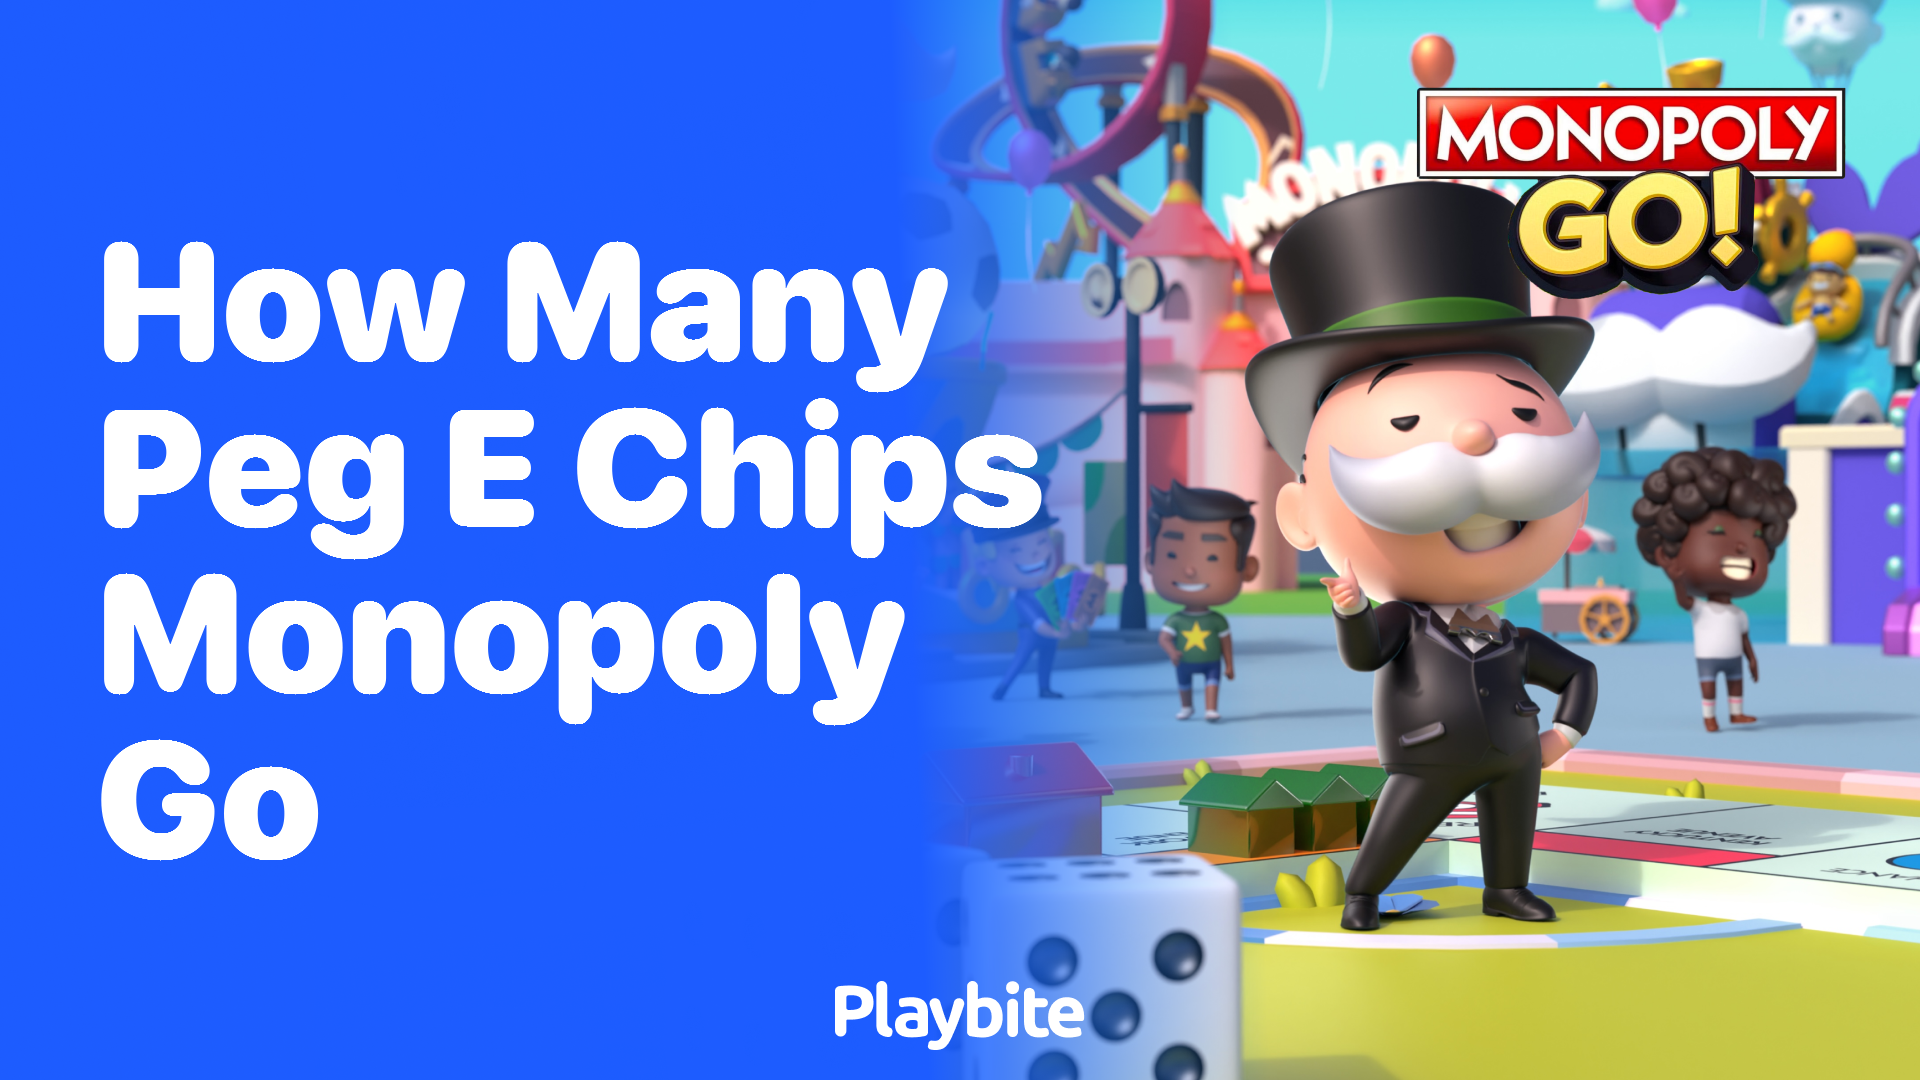 How Many Peg E Chips Are in Monopoly Go?